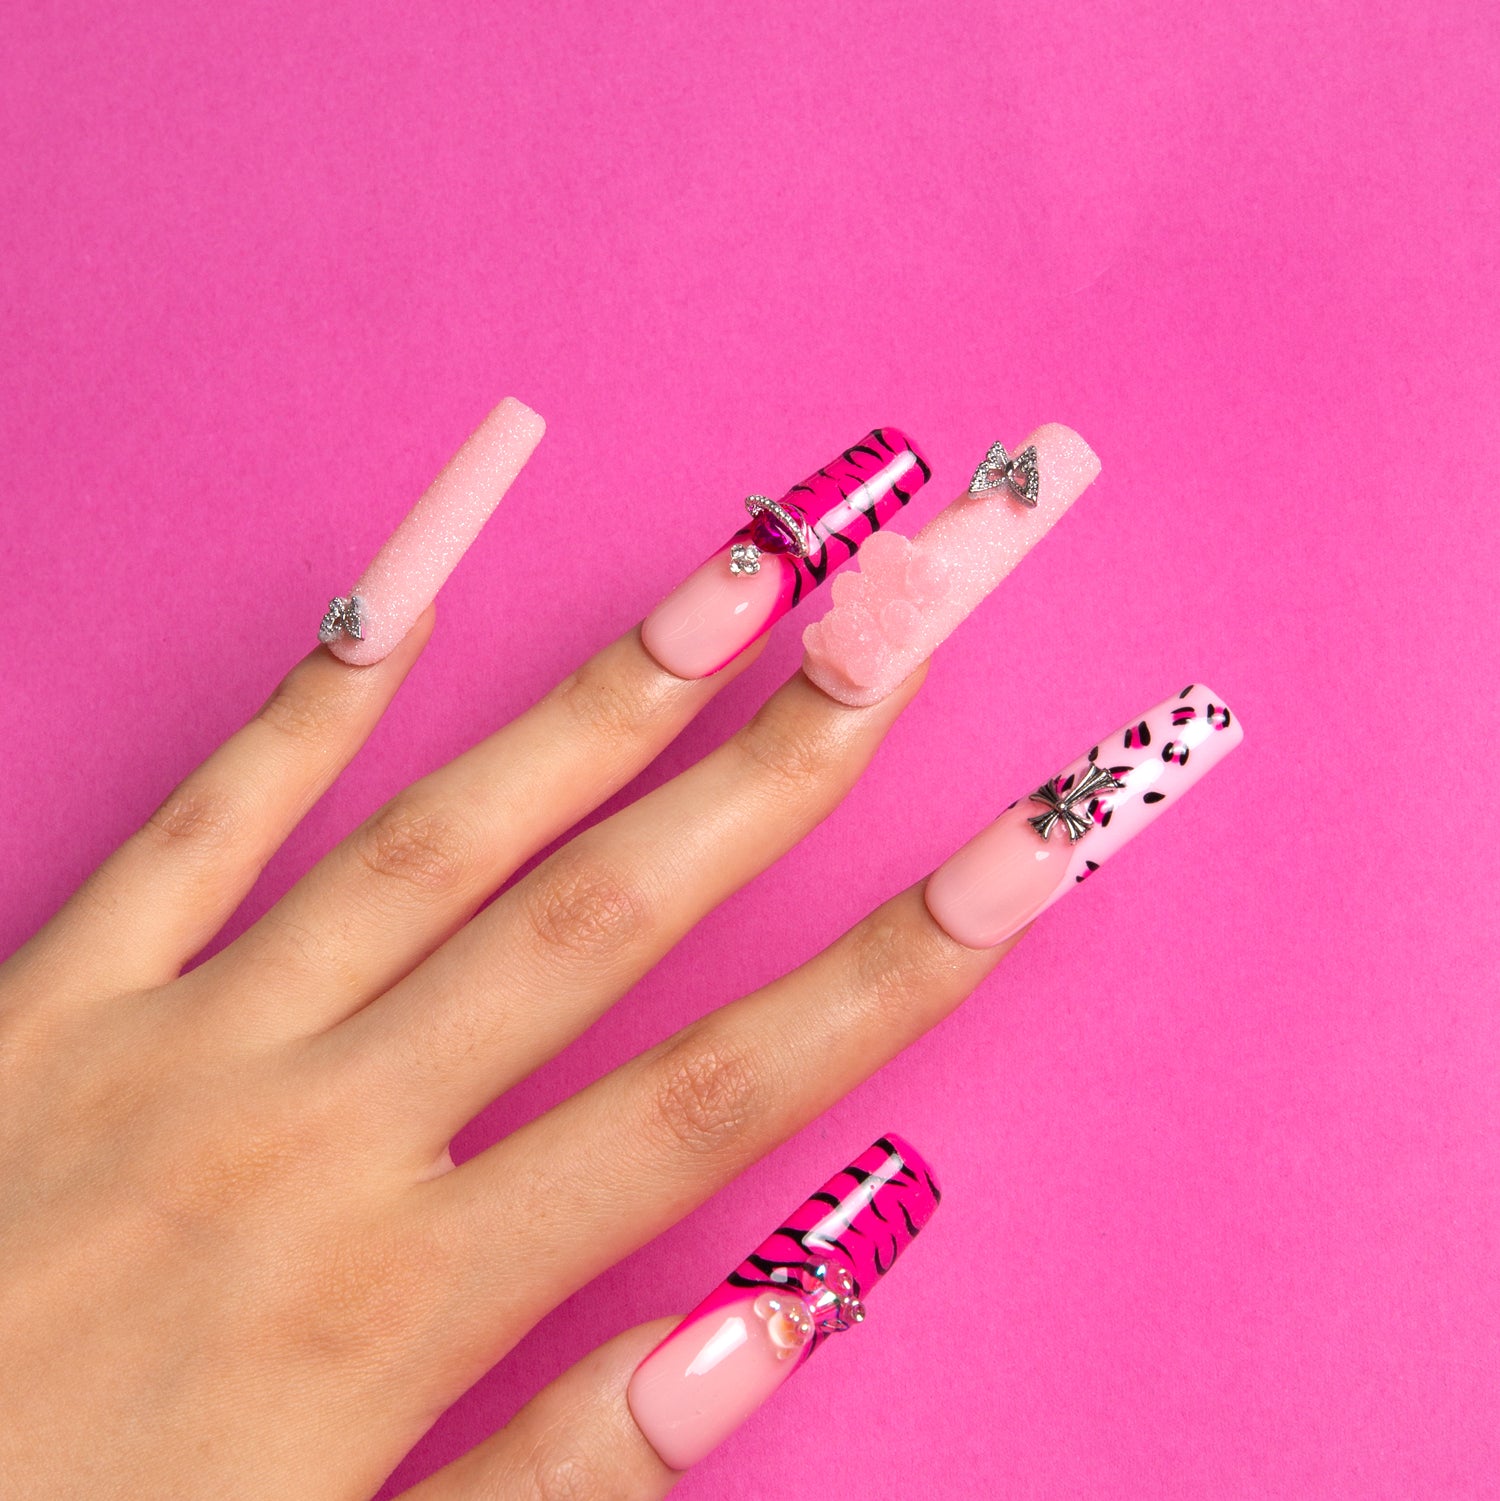 Hand with long square press-on nails with hot pink French tips, leopard prints, zebra patterns, glittery accents, and charms on vibrant pink background